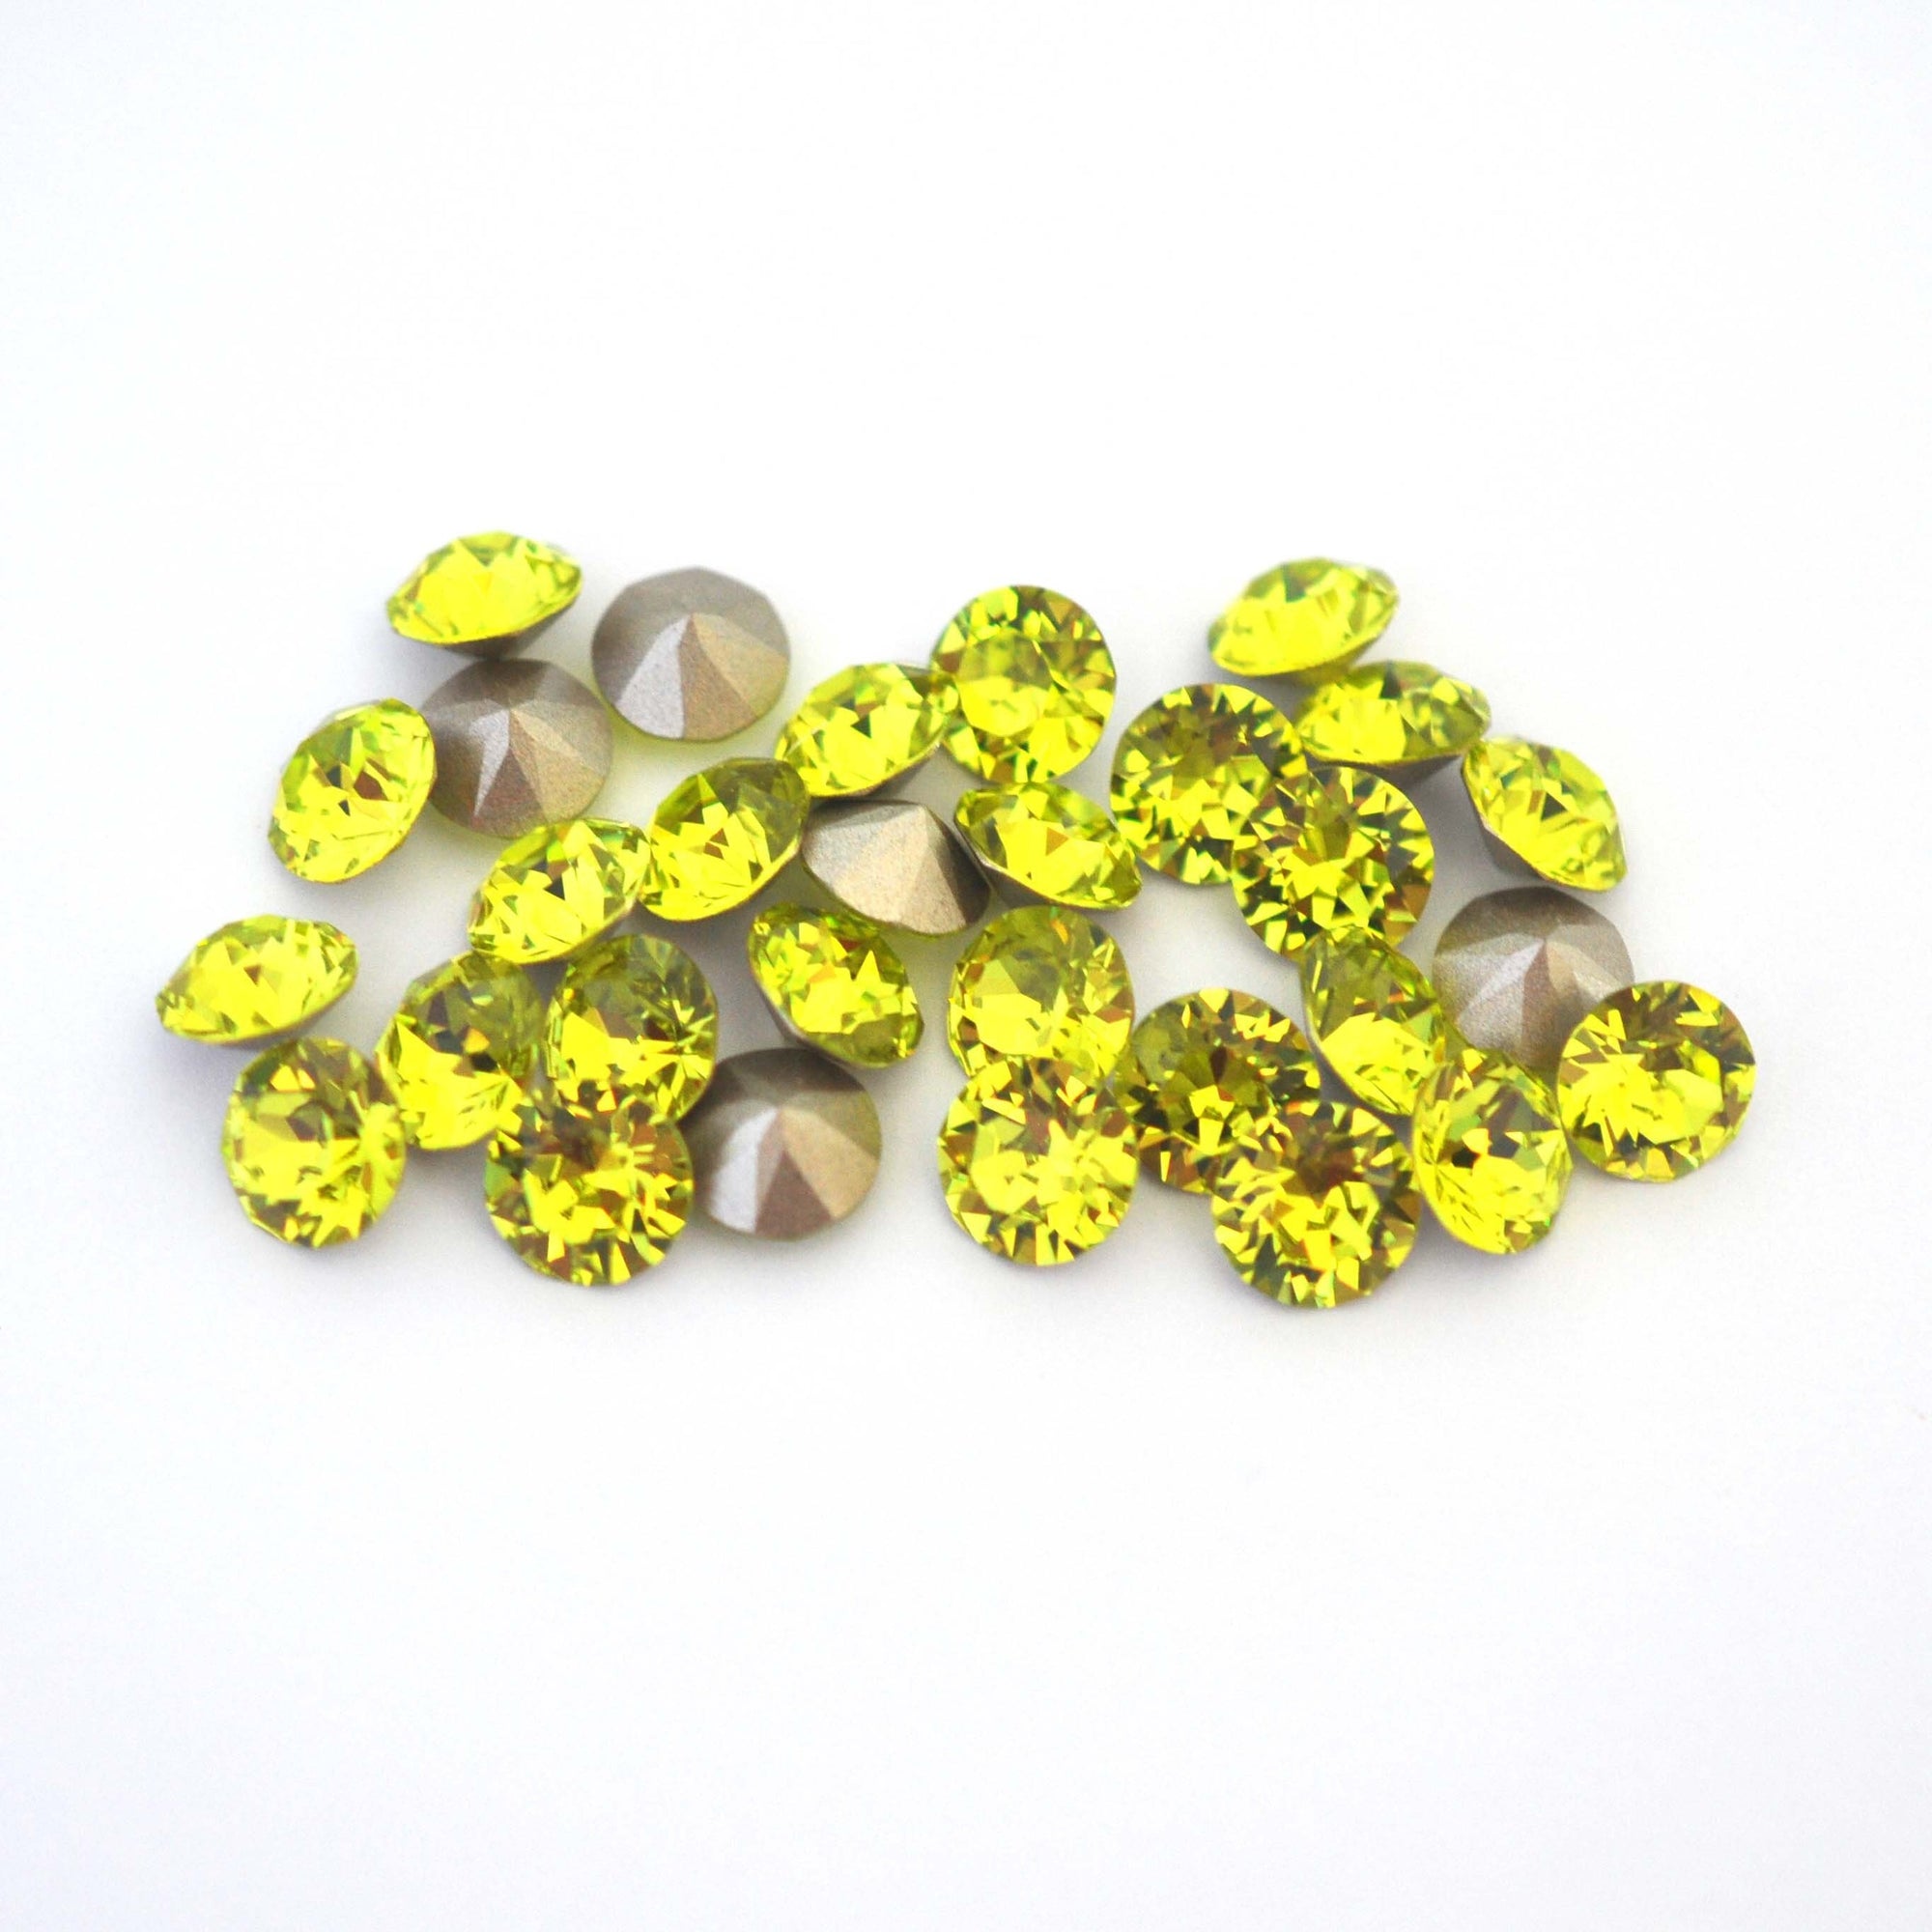 Citrus Green 1088 Pointed Back Chaton Barton Crystal 39ss, 8mm